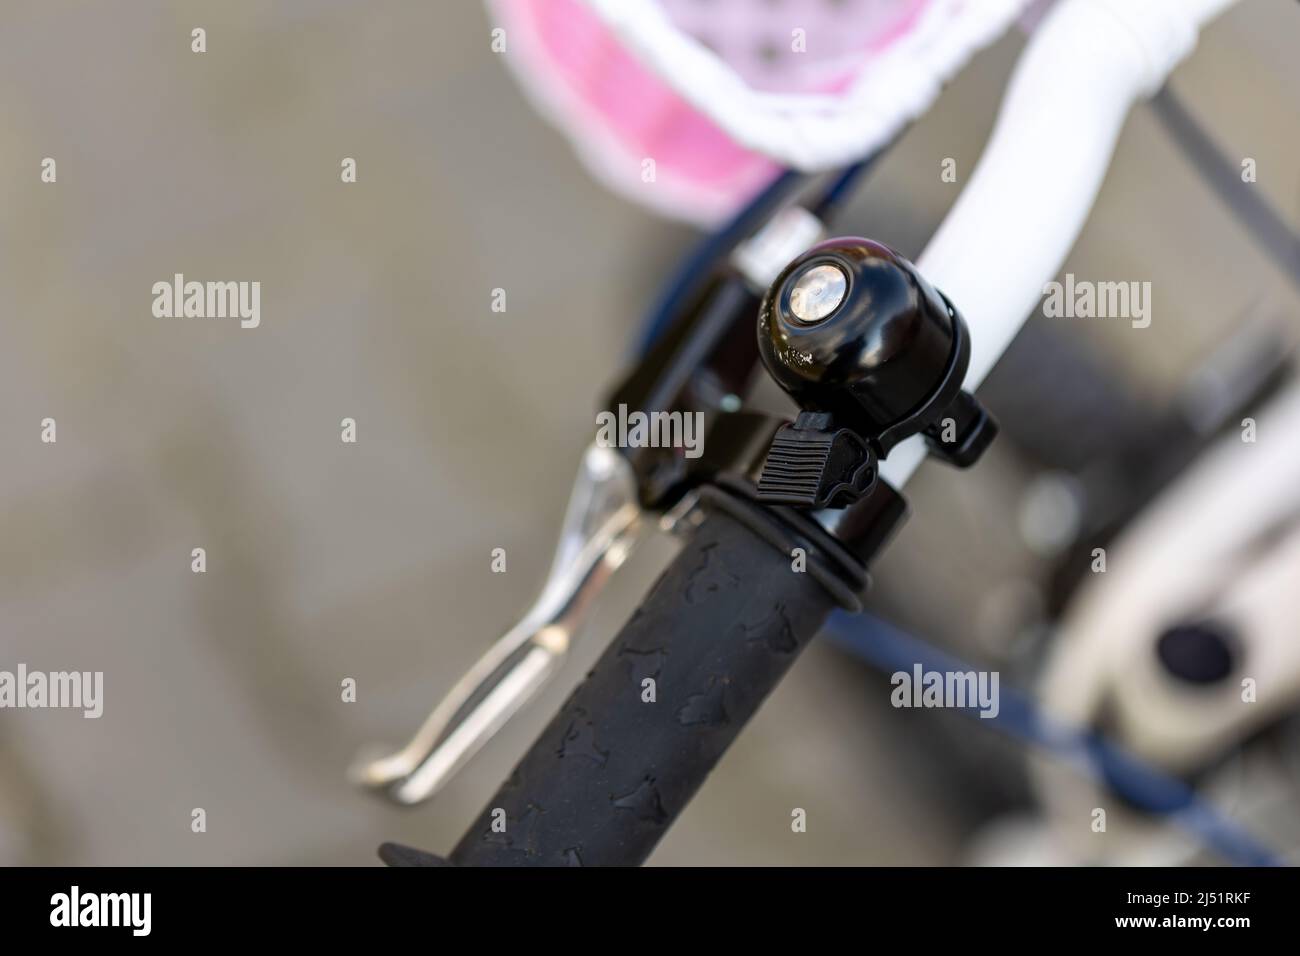 White children's bike, close-up of the bell attached to the handlebar. Blurred background, photo taken in natural, soft light Stock Photo